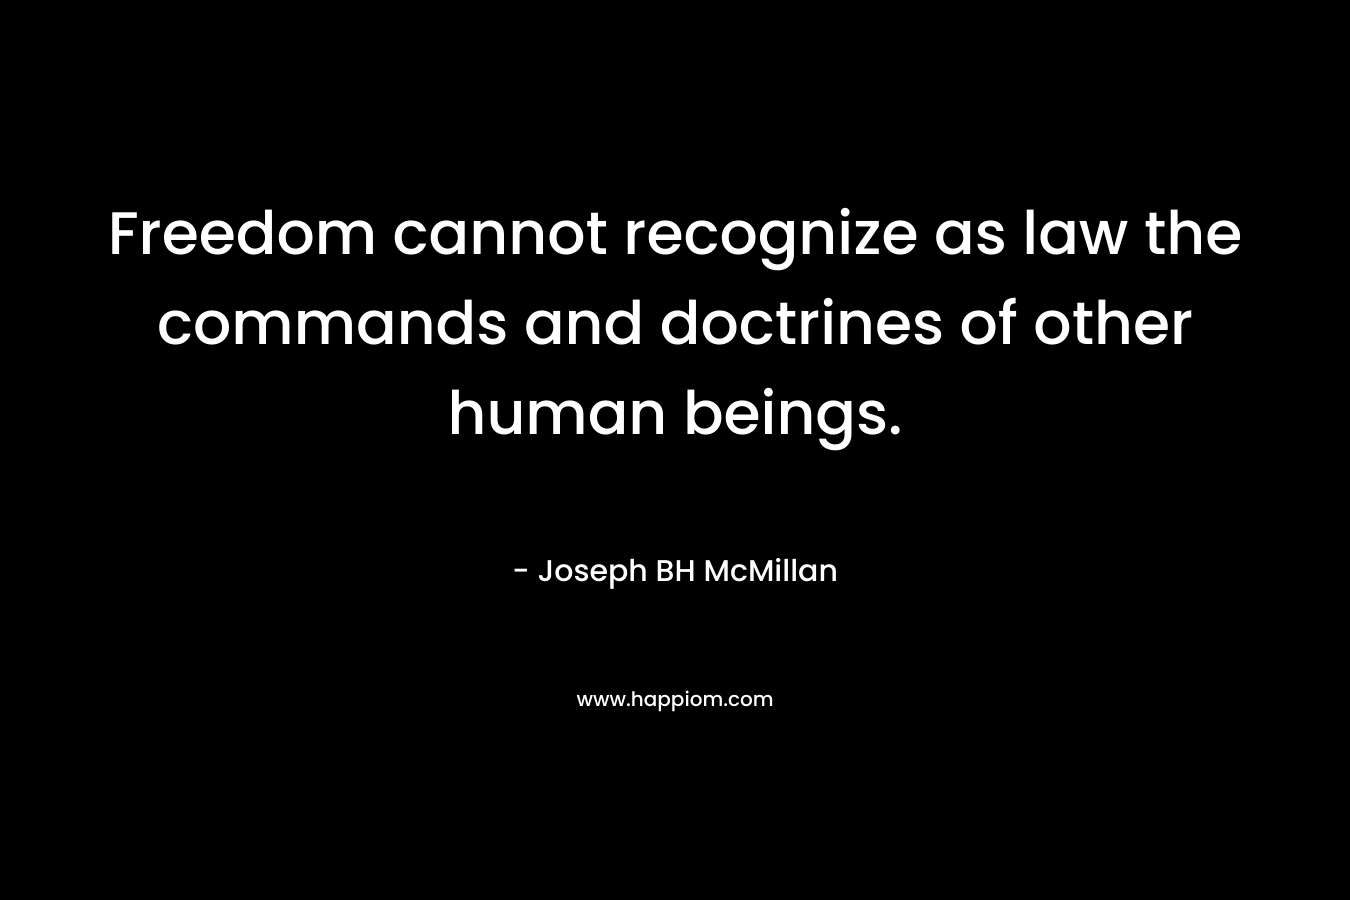 Freedom cannot recognize as law the commands and doctrines of other human beings.